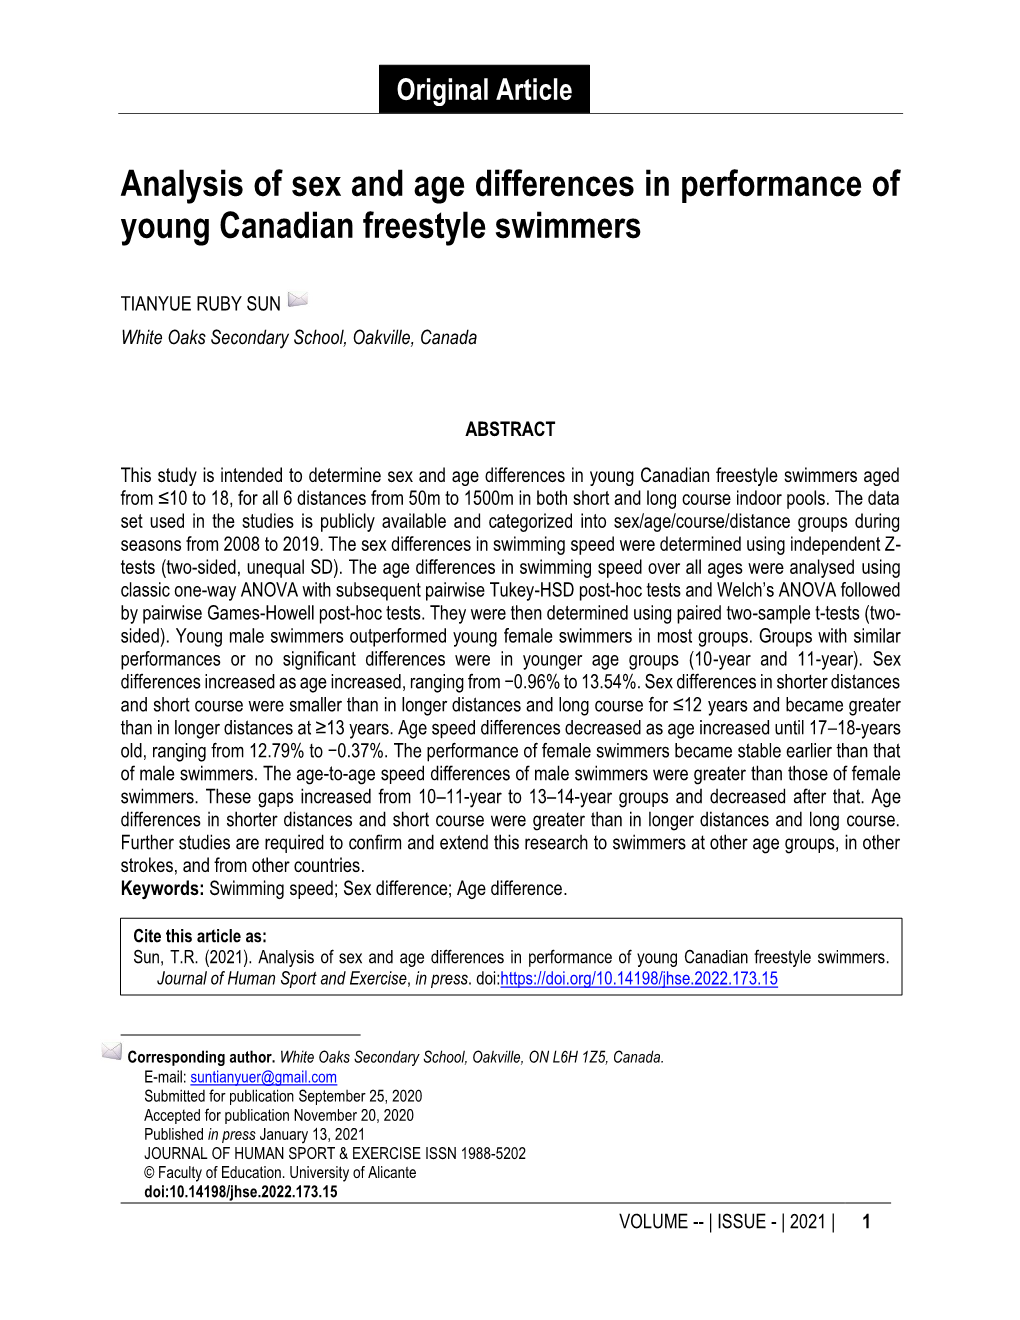 Analysis of Sex and Age Differences in Performance of Young Canadian Freestyle Swimmers